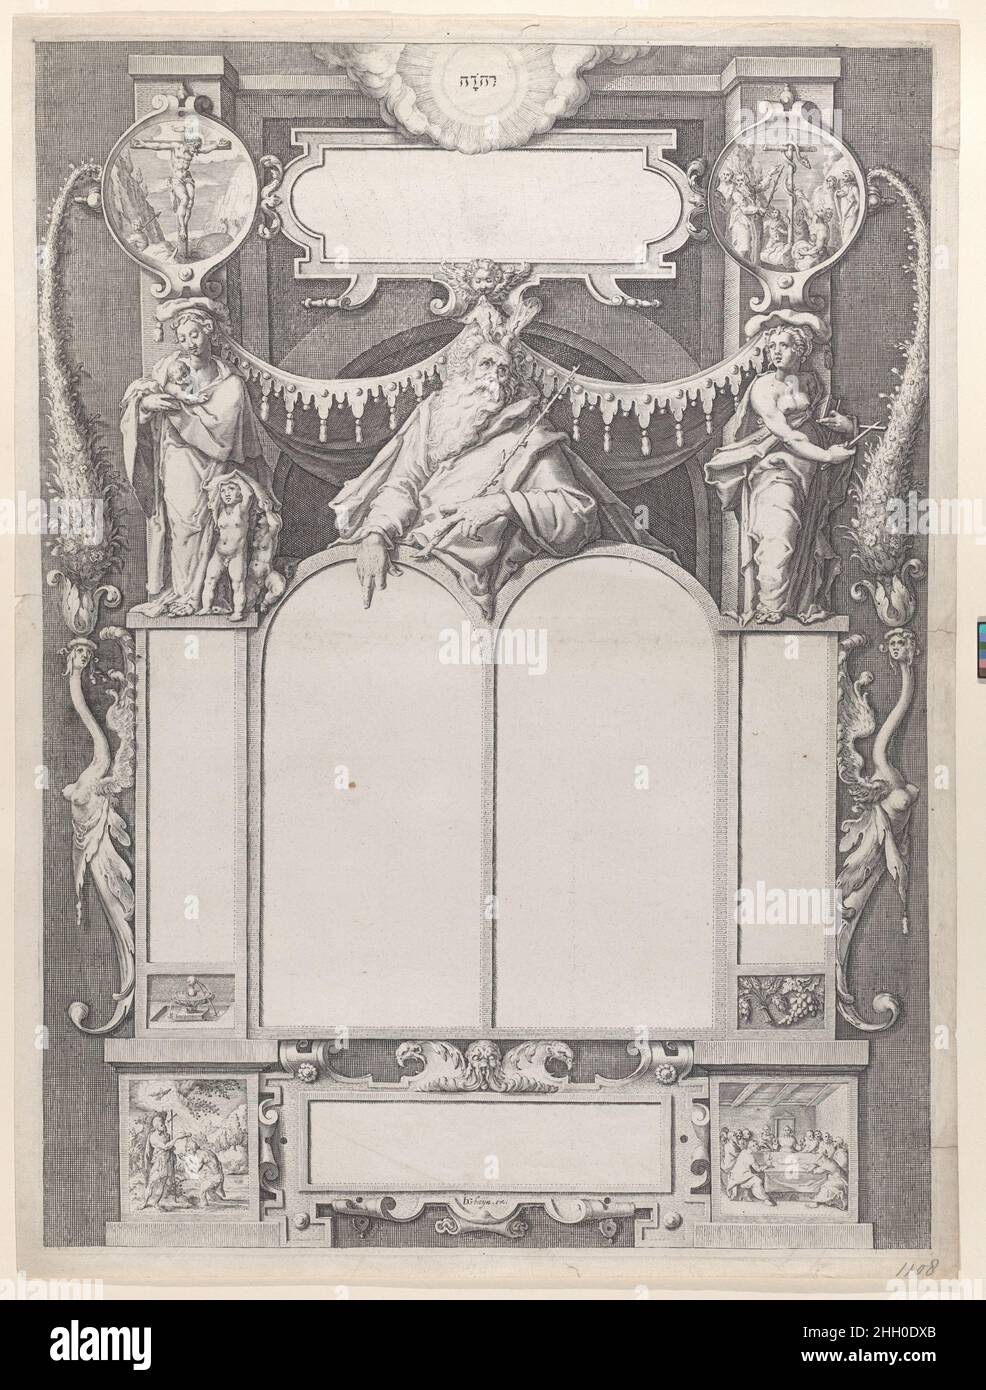 Moses with the Tables of the Law Workshop of Jacques de Gheyn II Netherlandish. Moses with the Tables of the Law. Workshop of Jacques de Gheyn II (Netherlandish, Antwerp 1565–1629 The Hague). Engraving. Prints Stock Photo